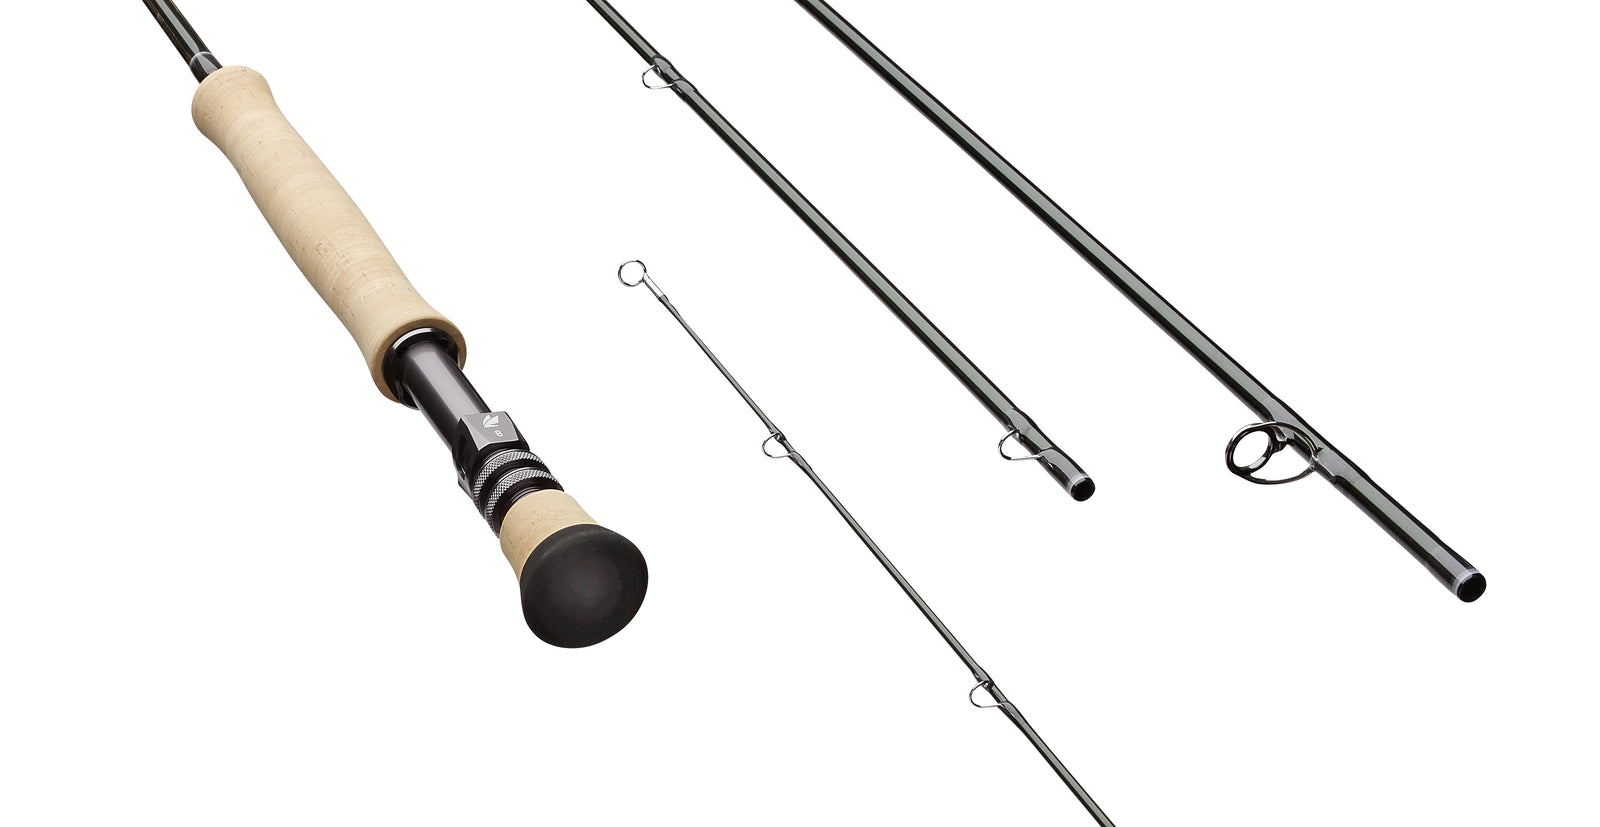 LOOMIS “ASQUITH” GRAPHITE FLY ROD, 9’ FOR AN 8WT